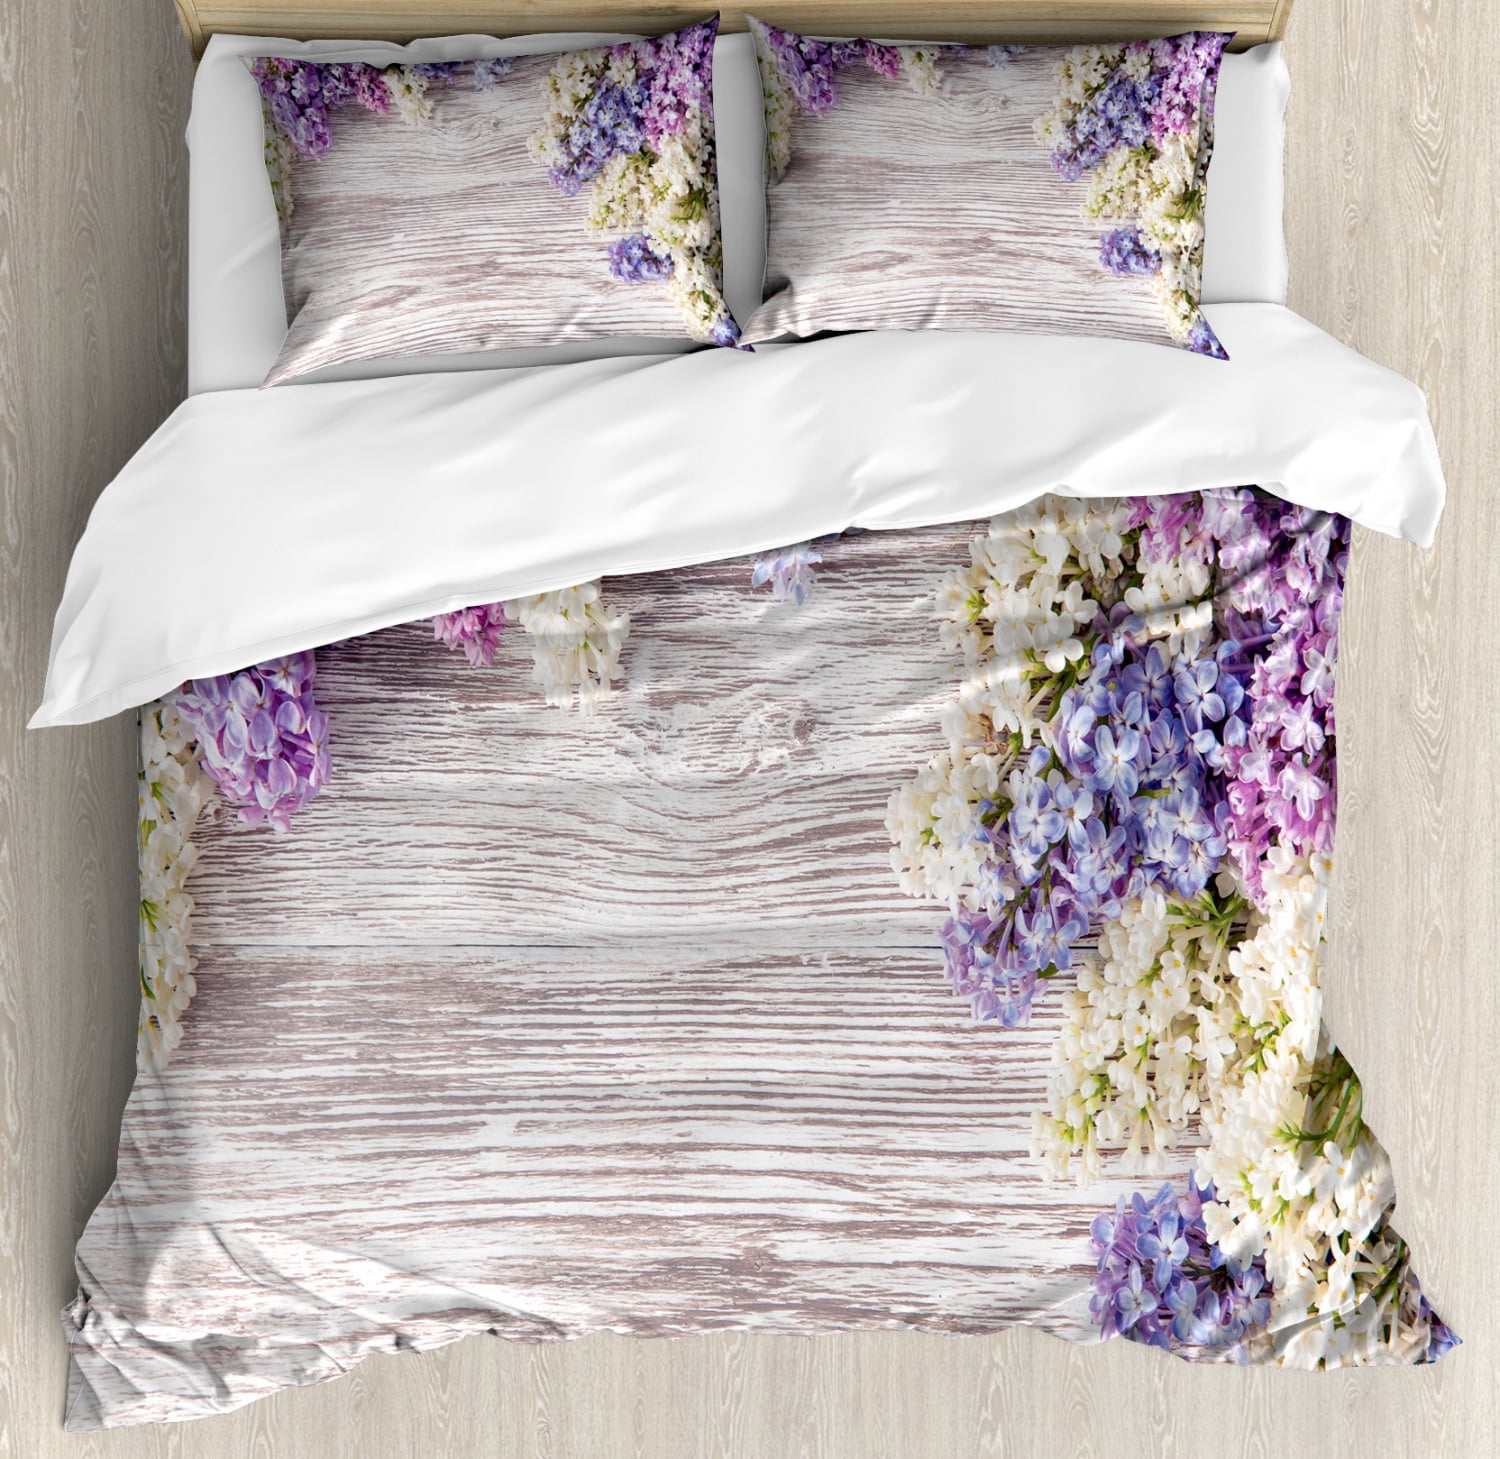 Rustic King Size Duvet Cover Set Lilac, Lilac Duvet Cover Sets King Size